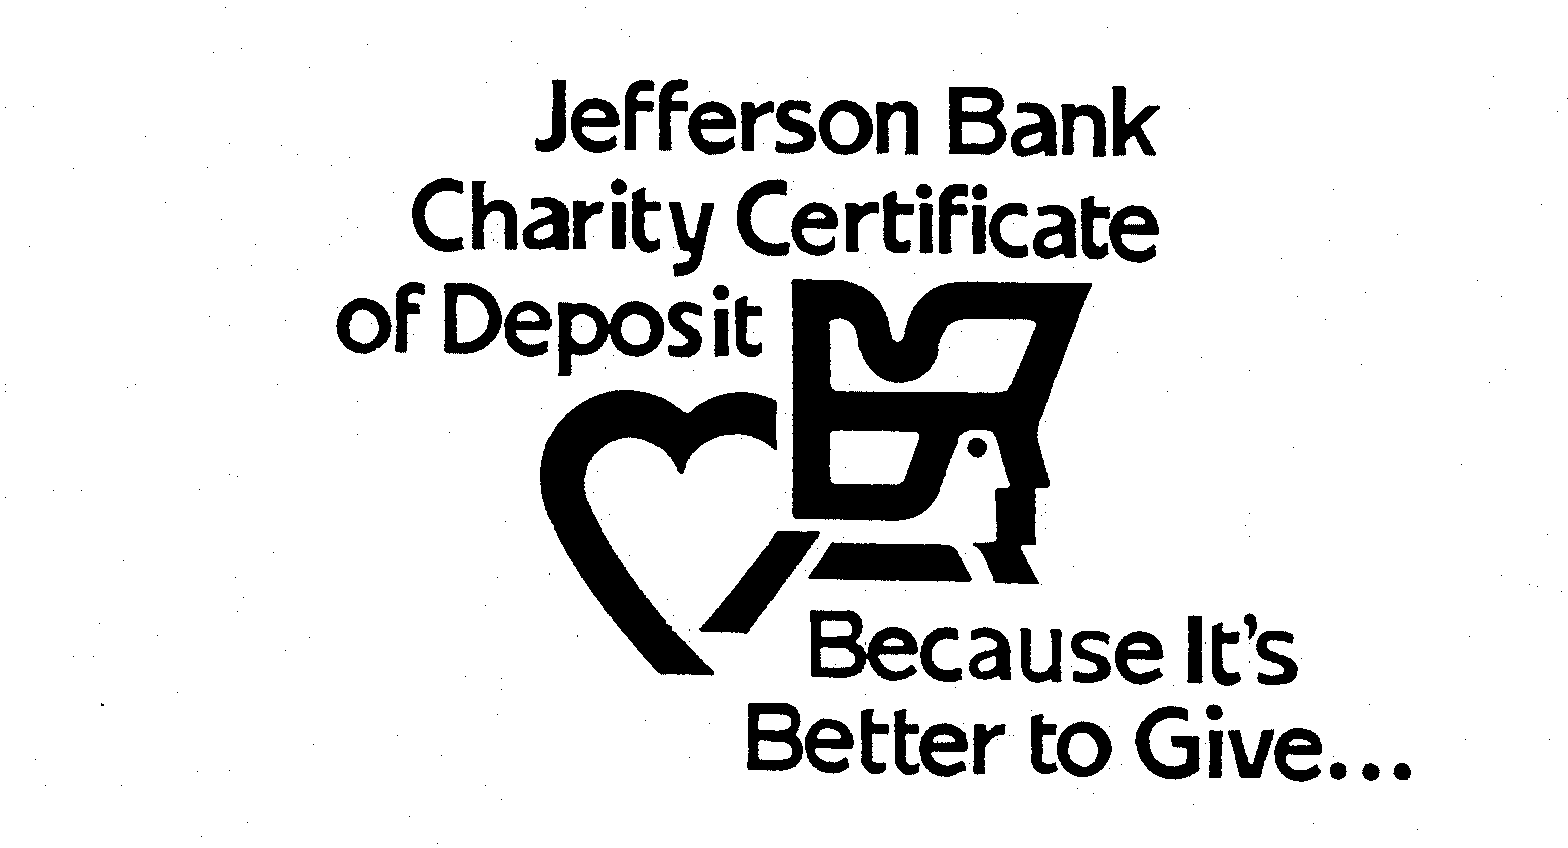  JEFFERSON BANK CHARITY CERTIFICATE OF DEPOSIT BECAUSE IT'S BETTER TO GIVE...